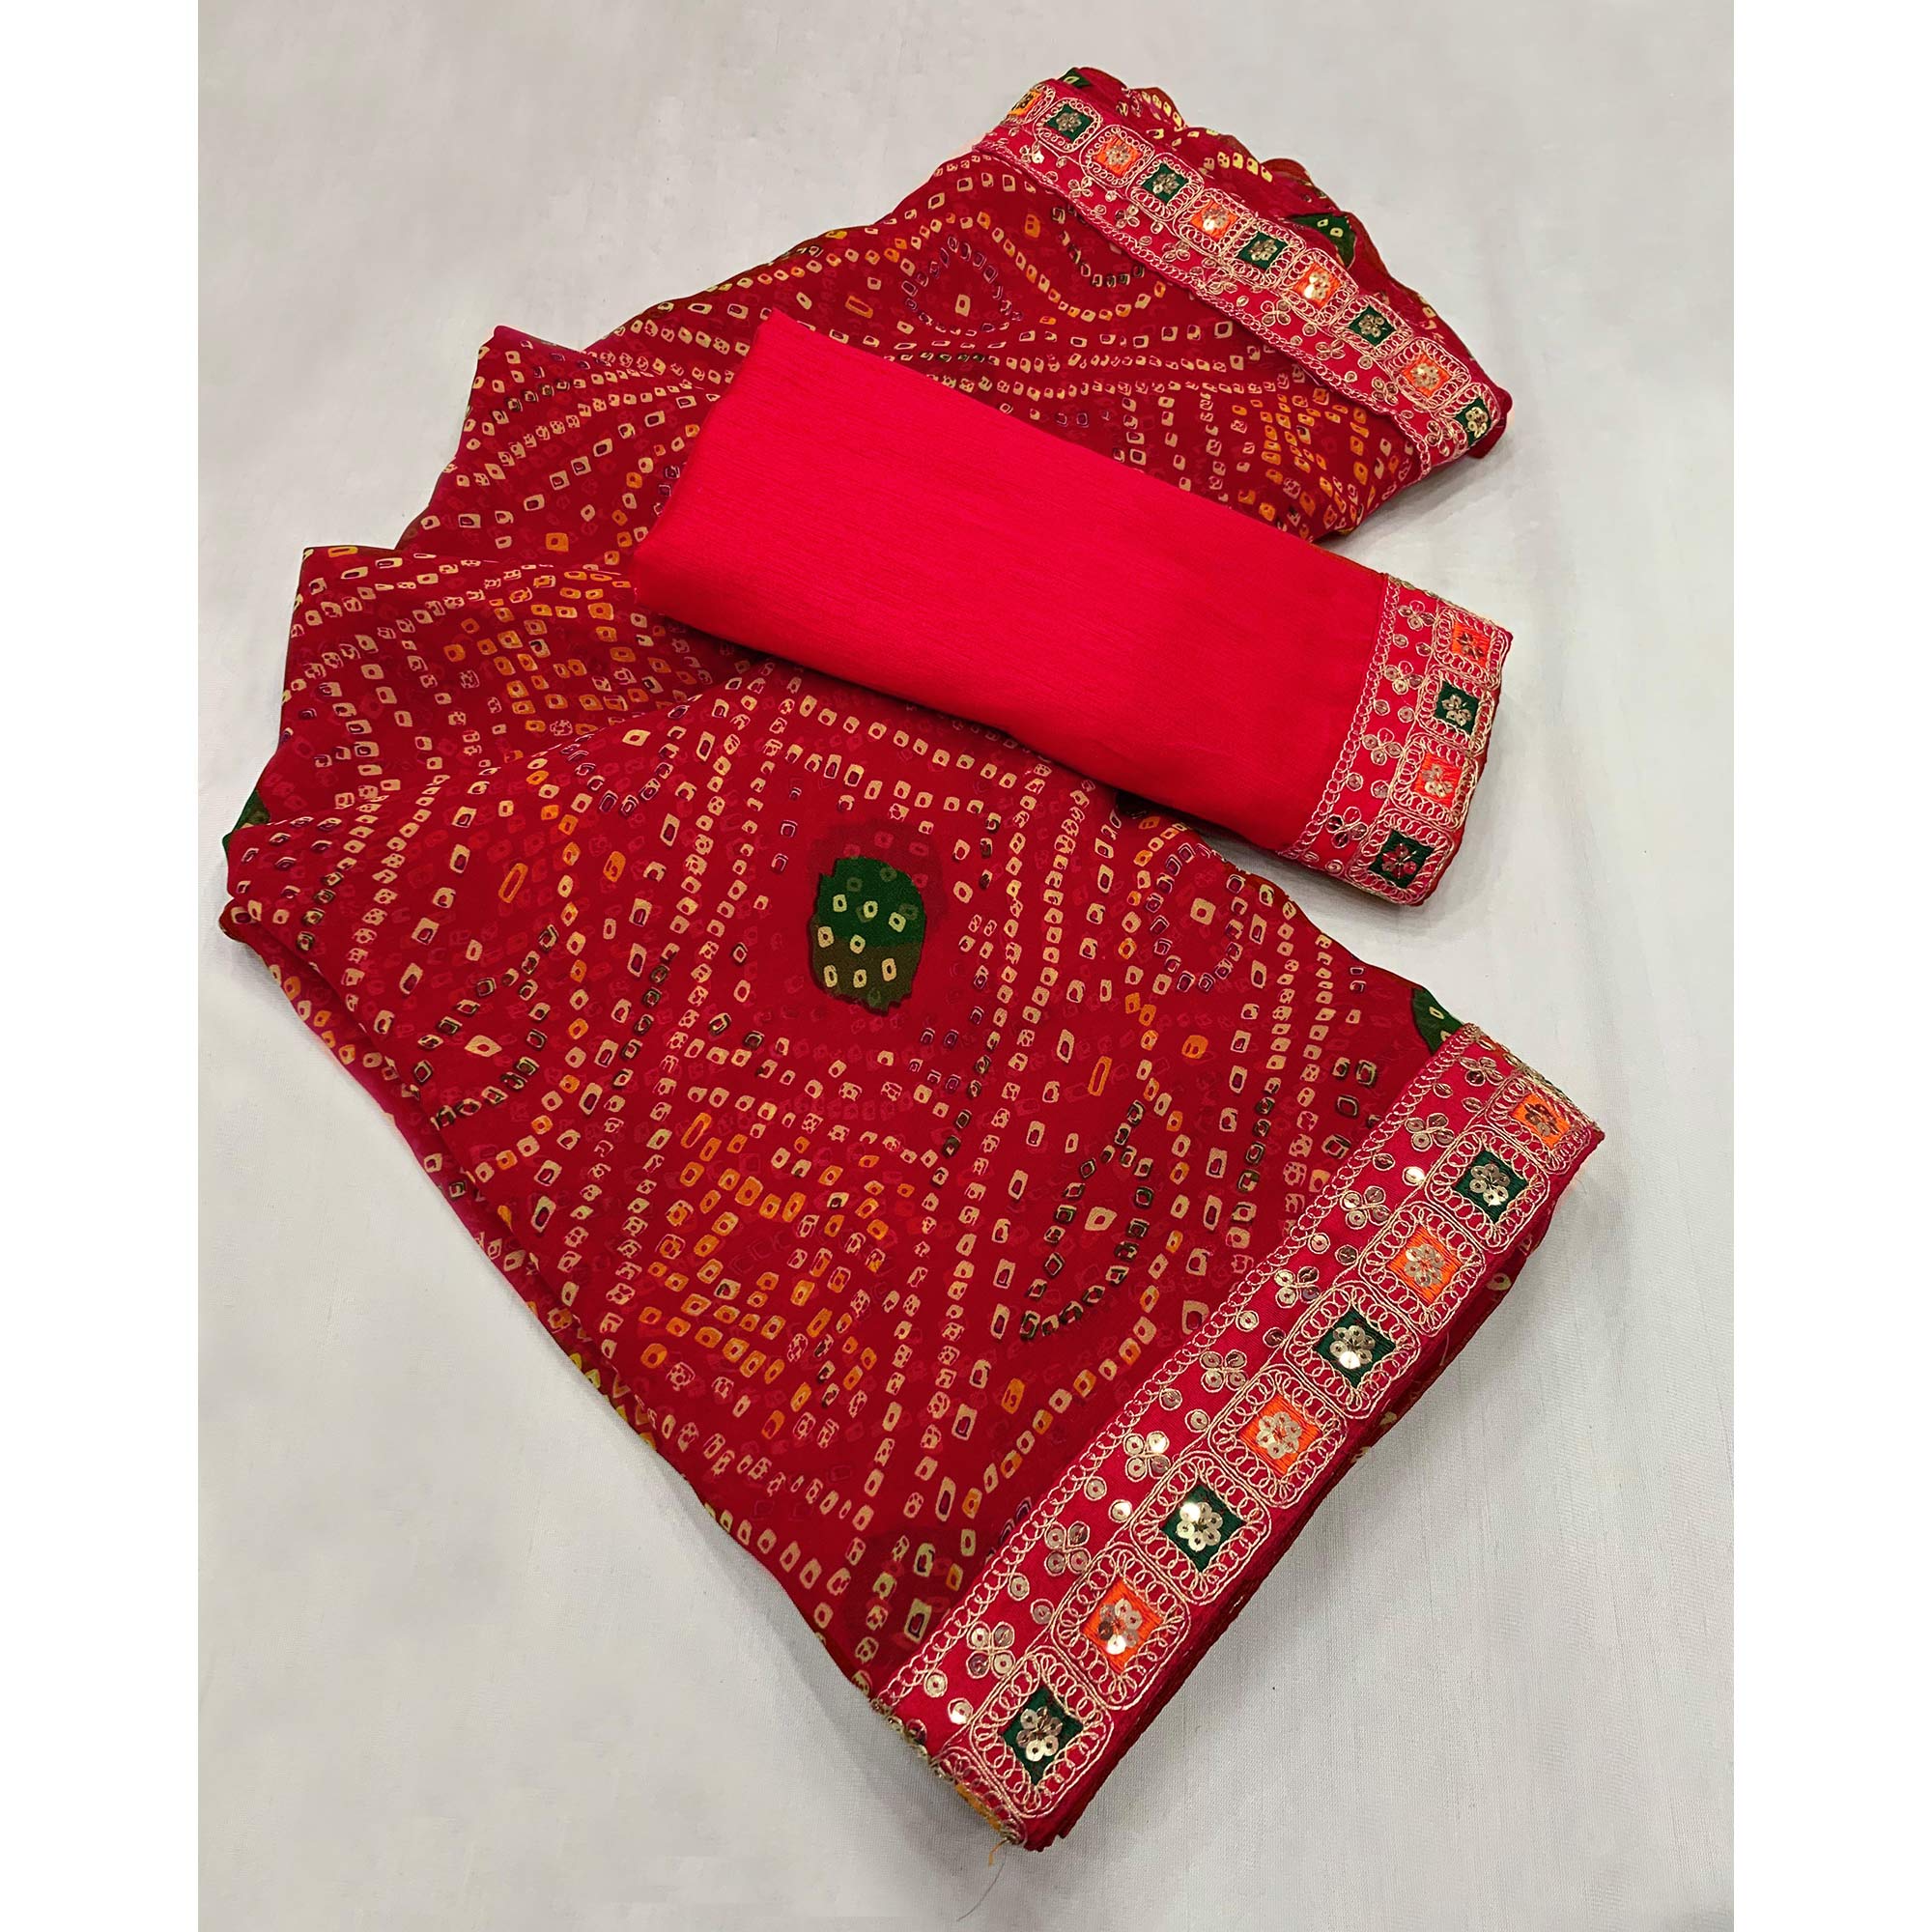 Red Bandhani Printed With Sequins Border Georgette Saree